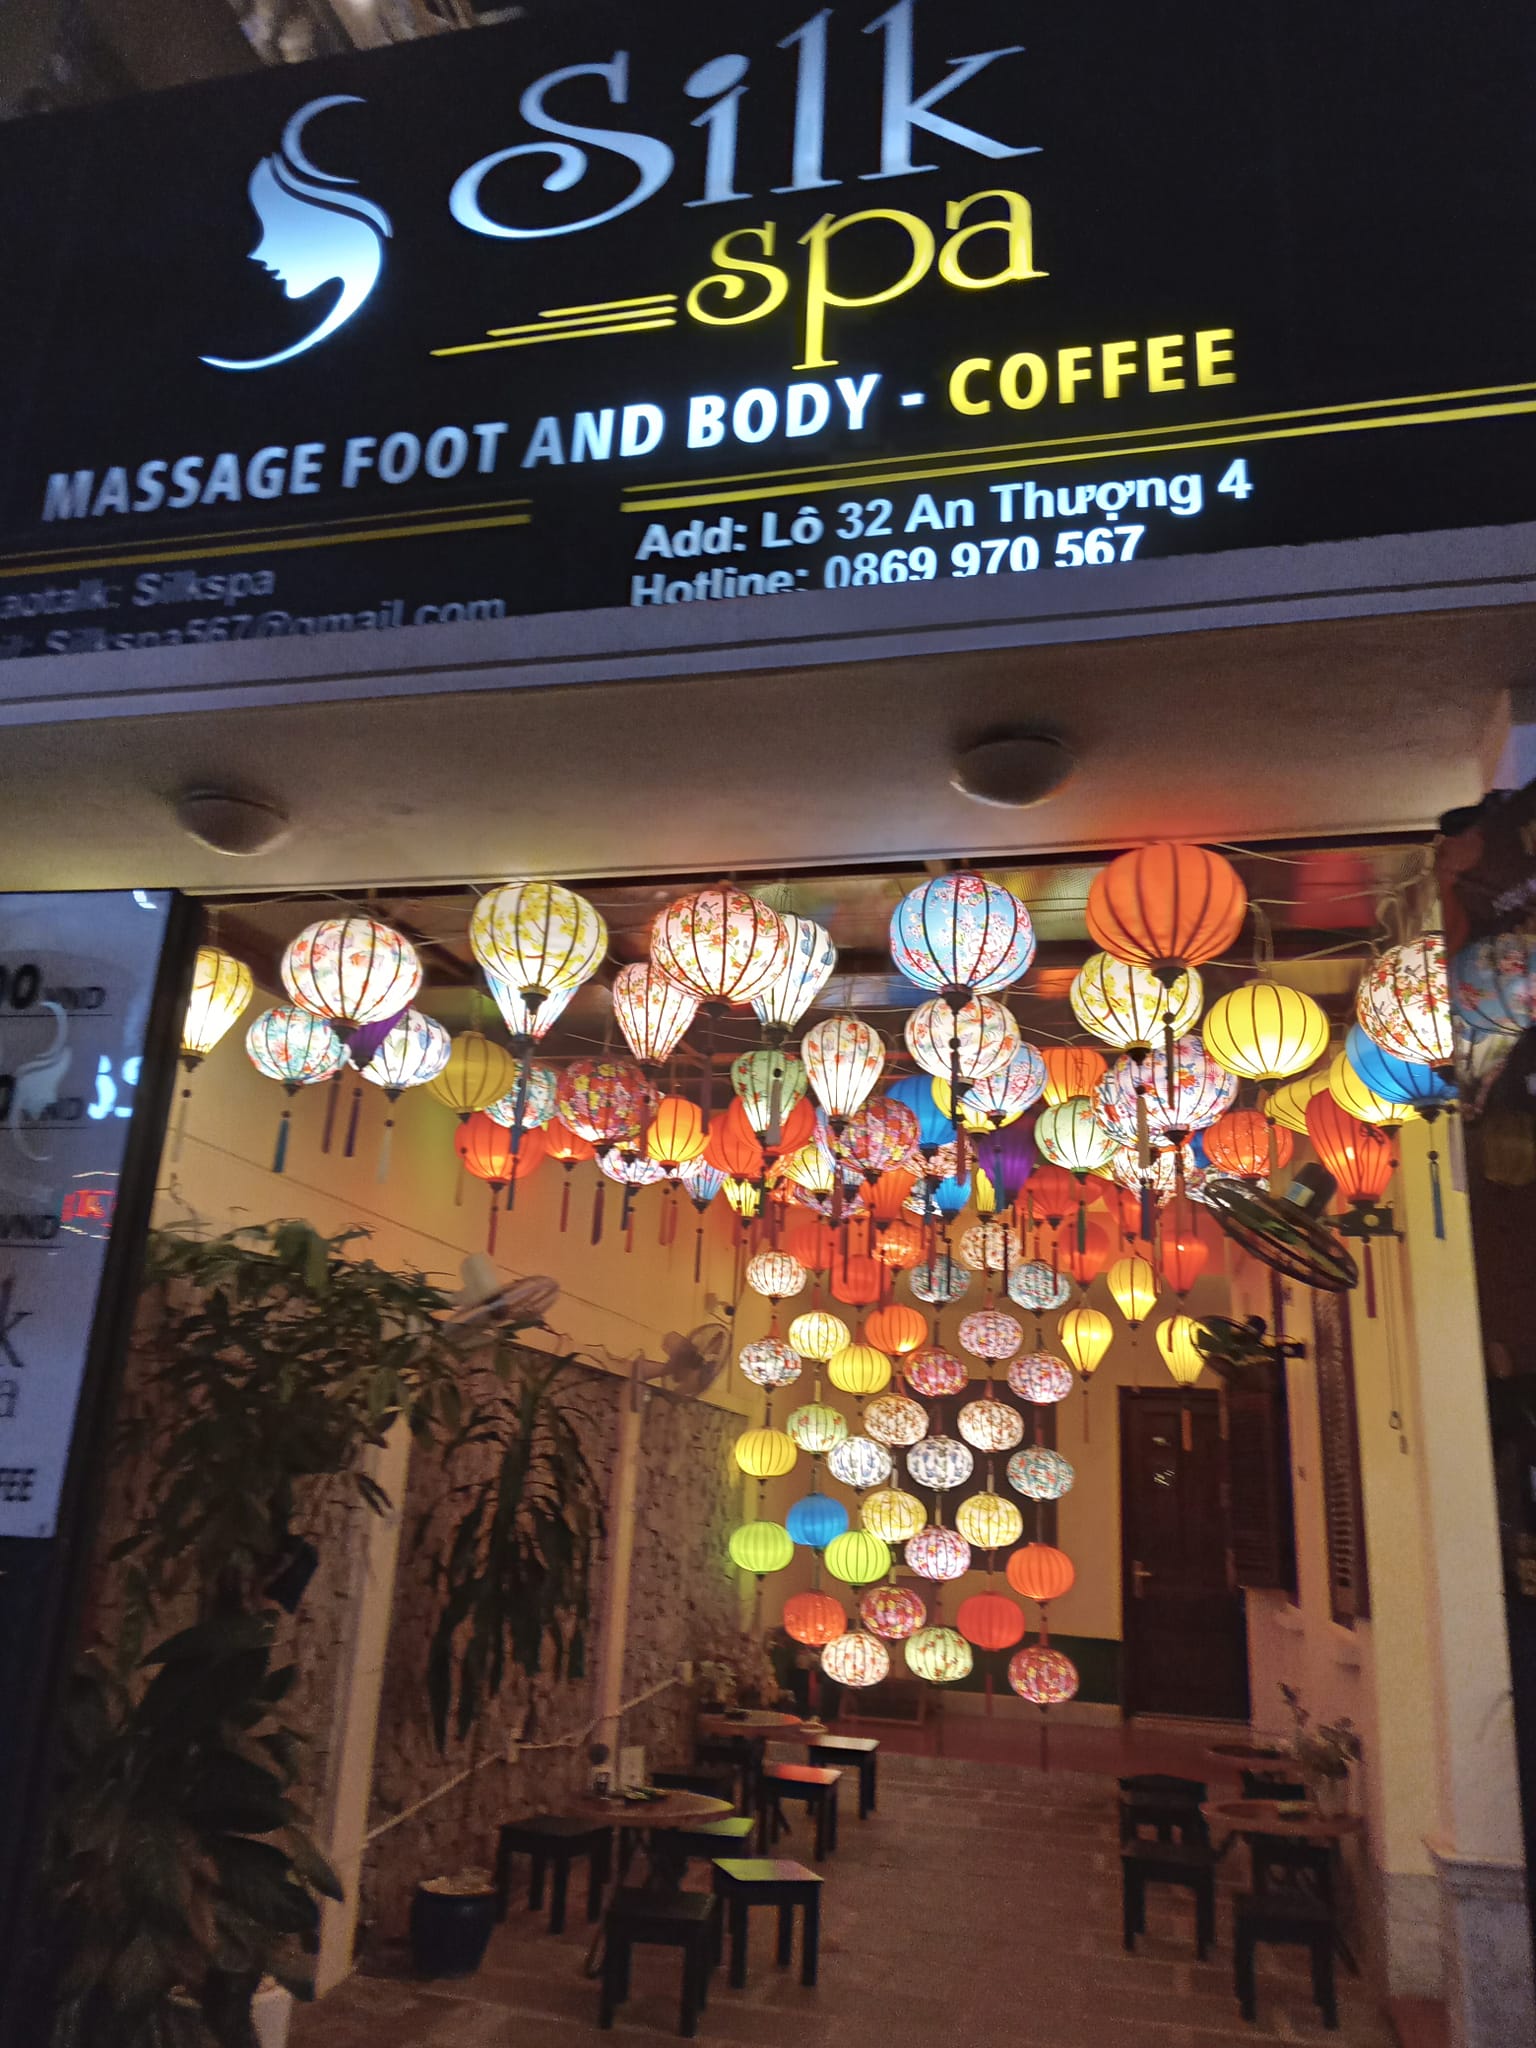 Massage storefront in Da Nang, Vietnam, with colourful lanterns hanging from the ceiling